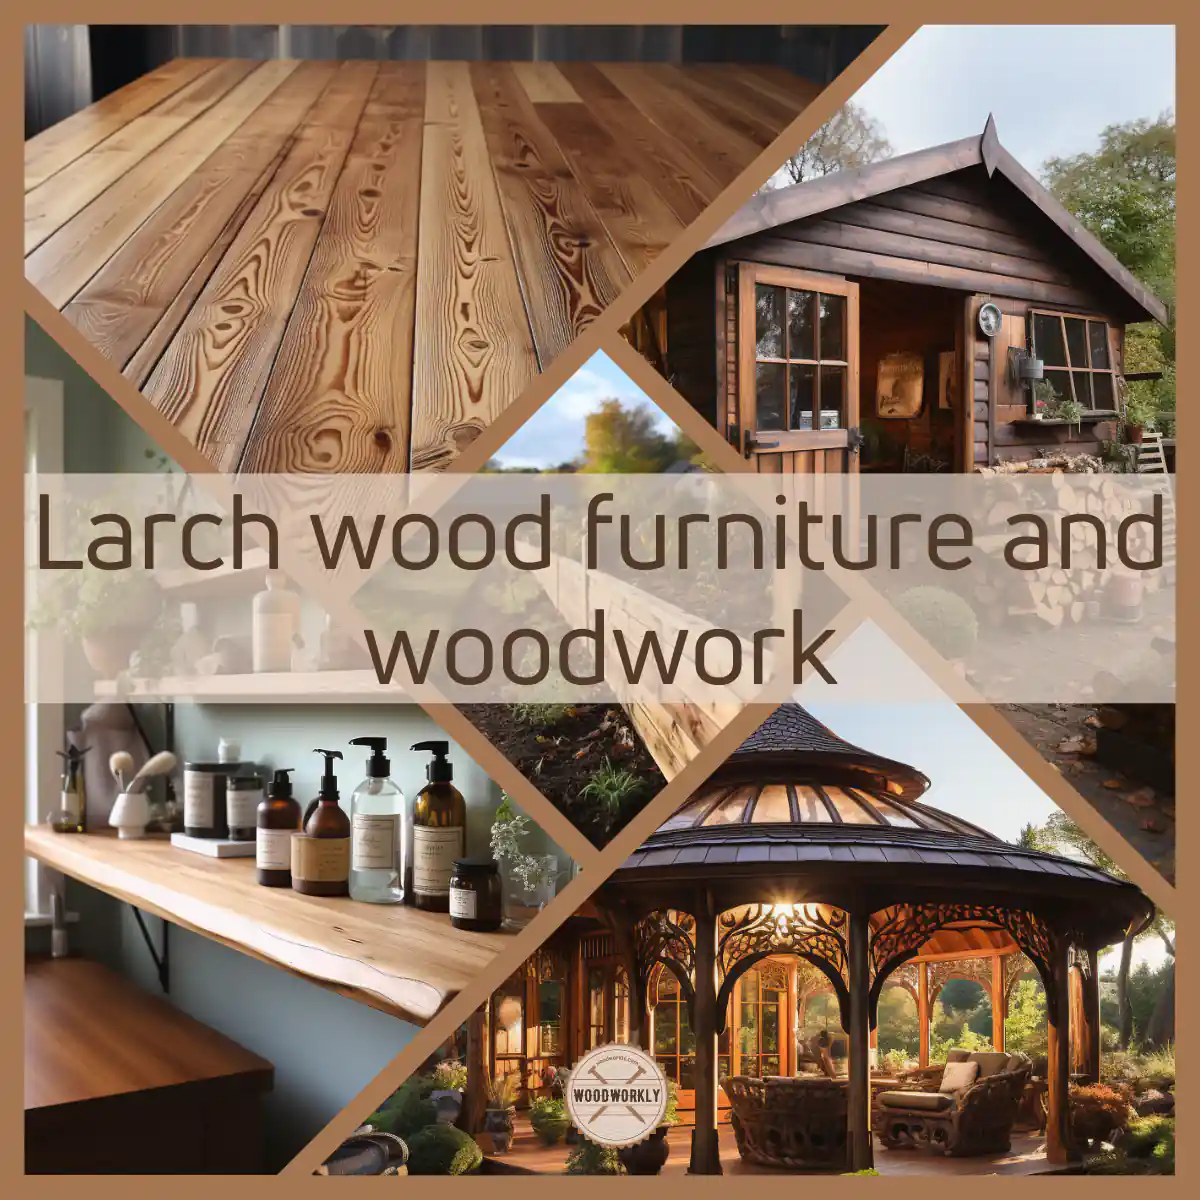 Larch wood furniture and woodwork